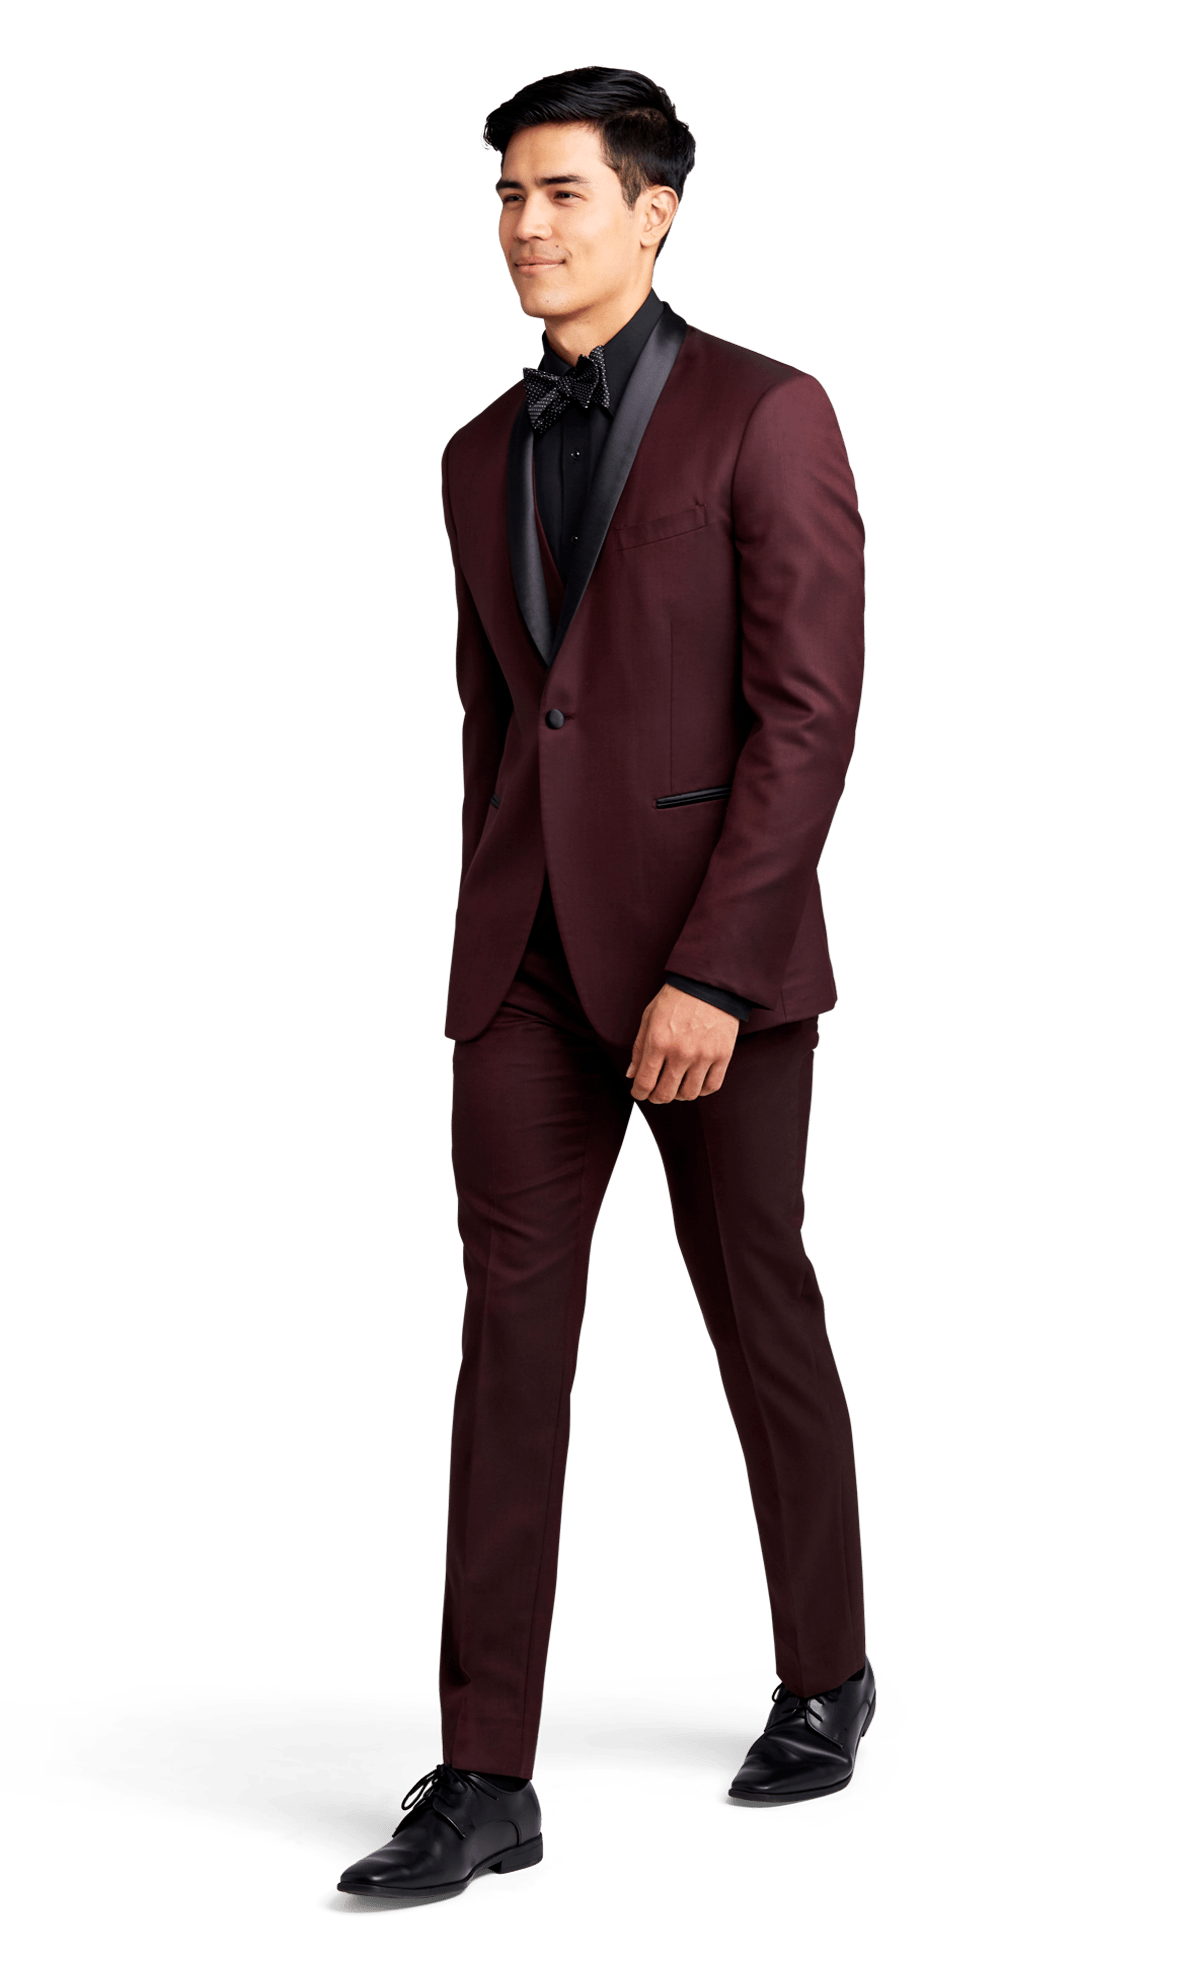 Dark Green Suit with Burgundy Shoes Outfits (19 ideas & outfits) | Lookastic